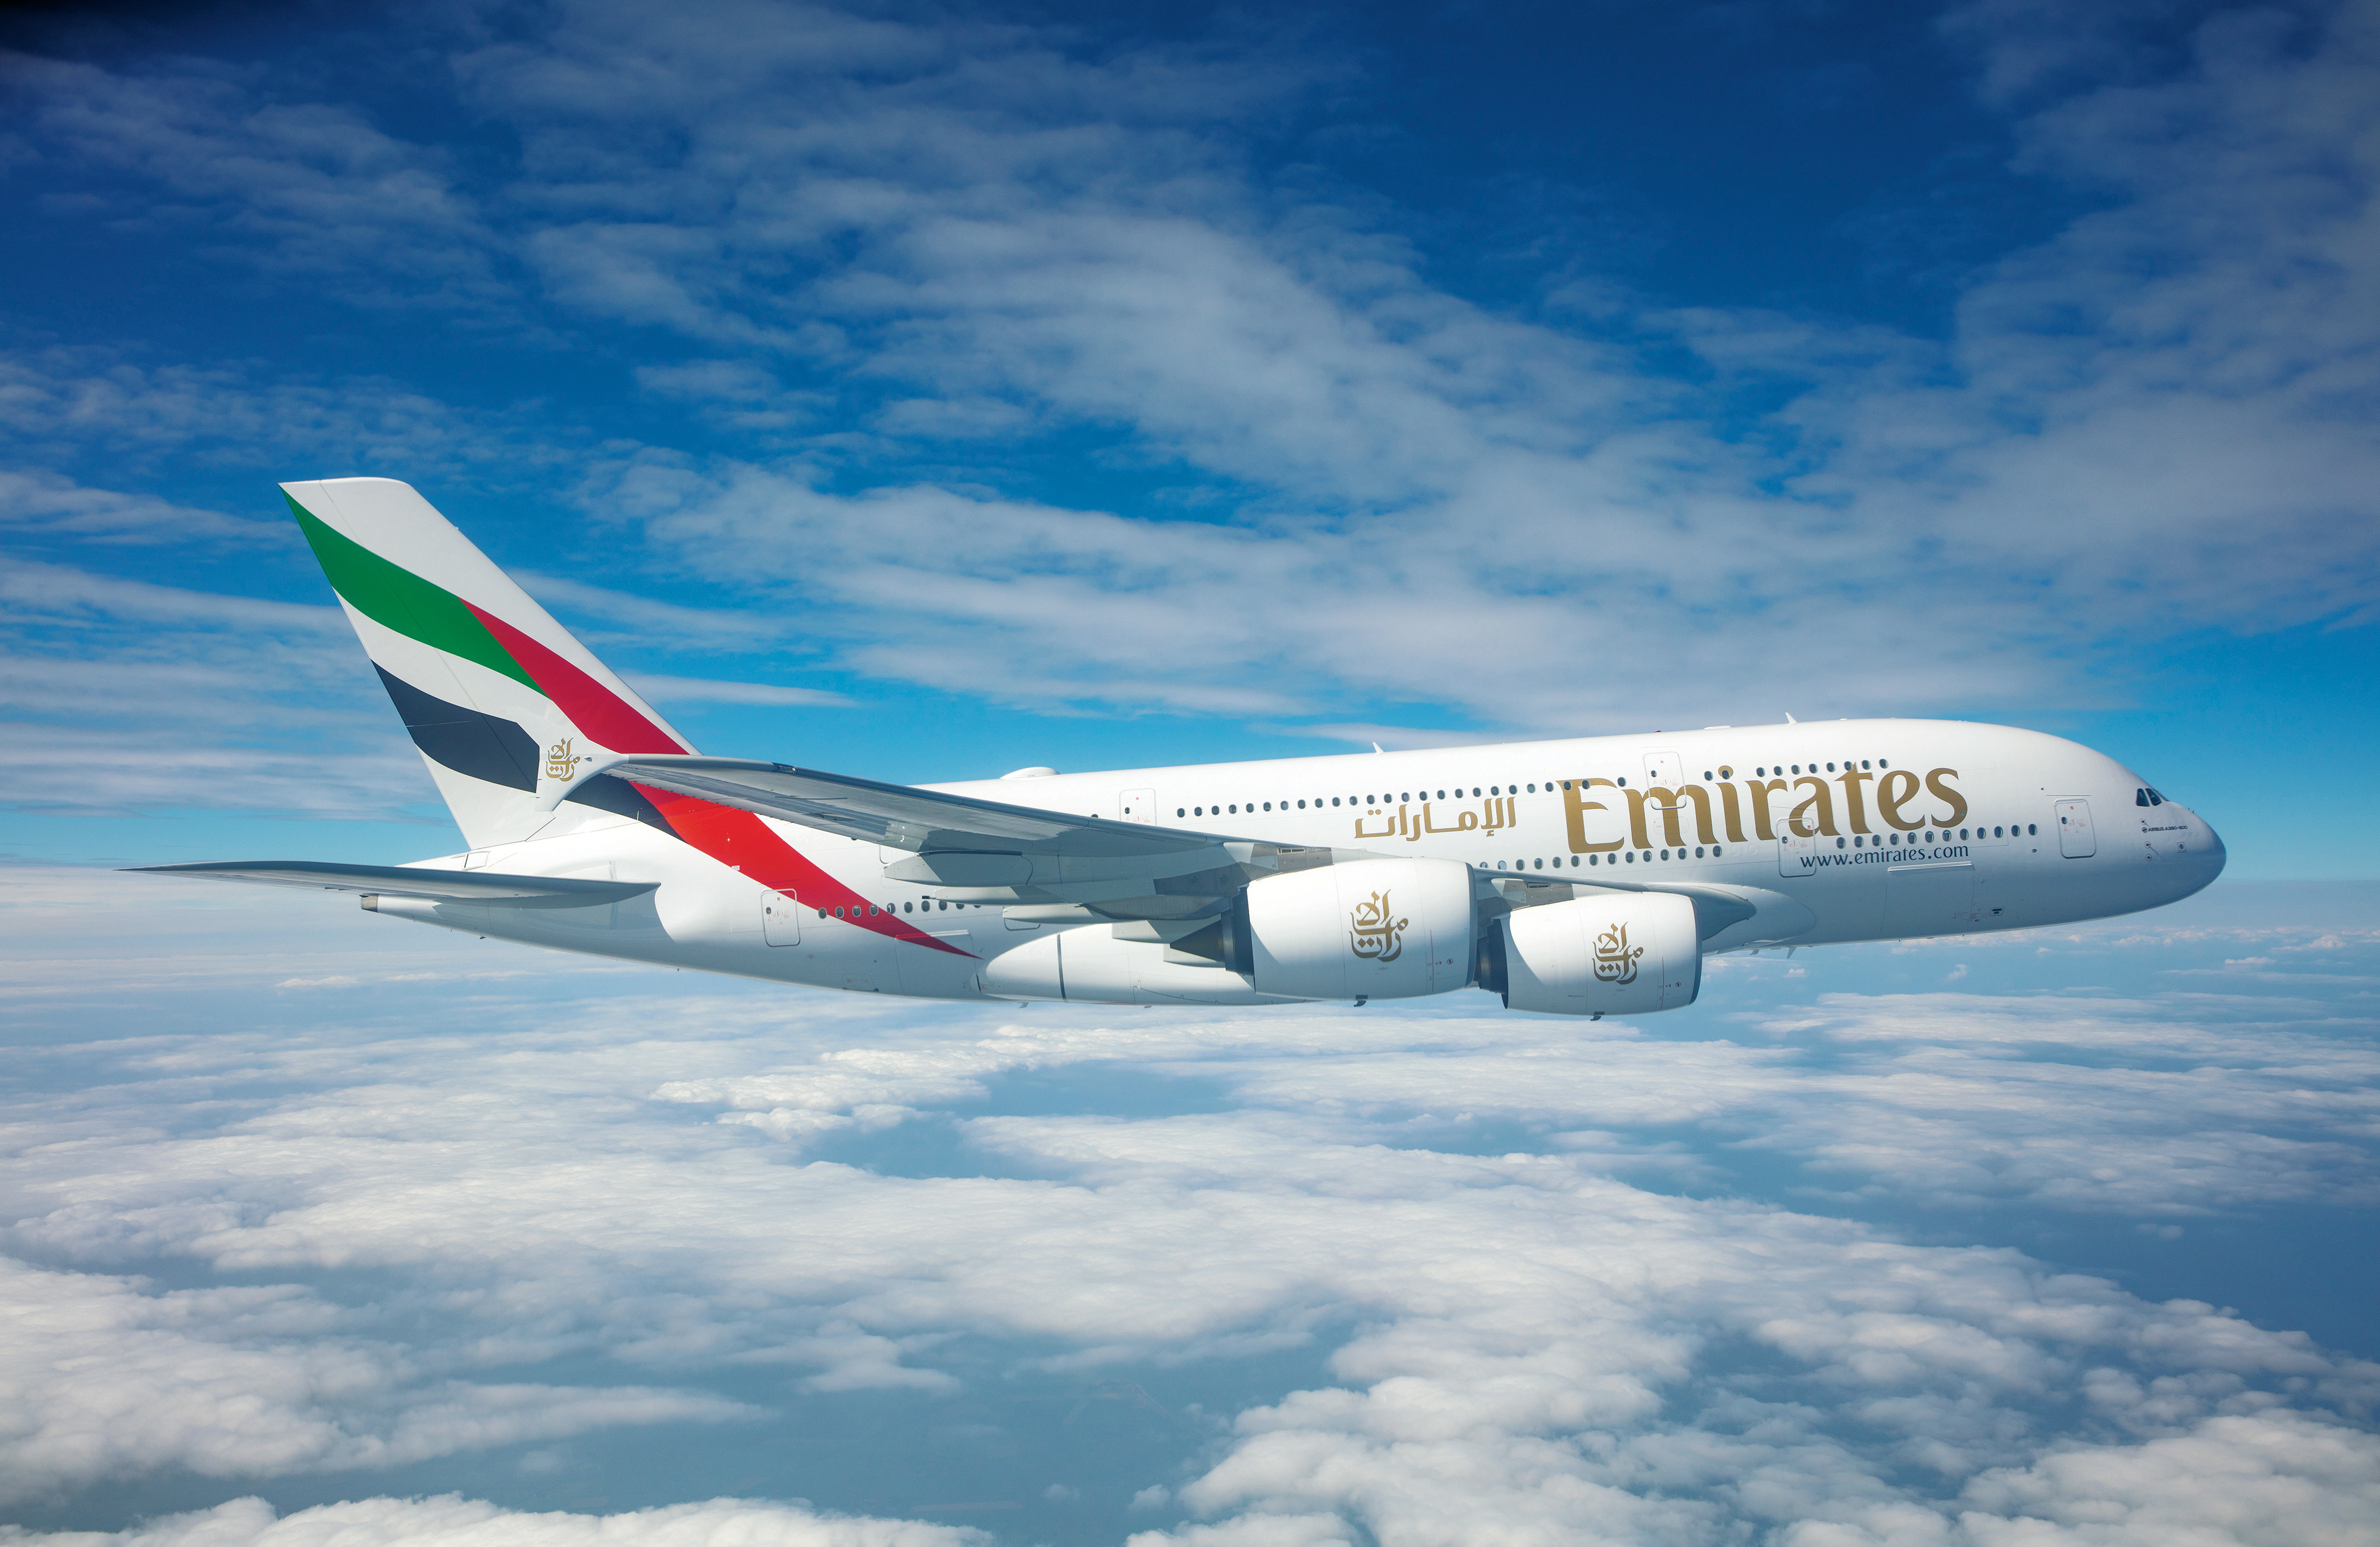  Emirates to offer daily flights to Toronto from 20 April